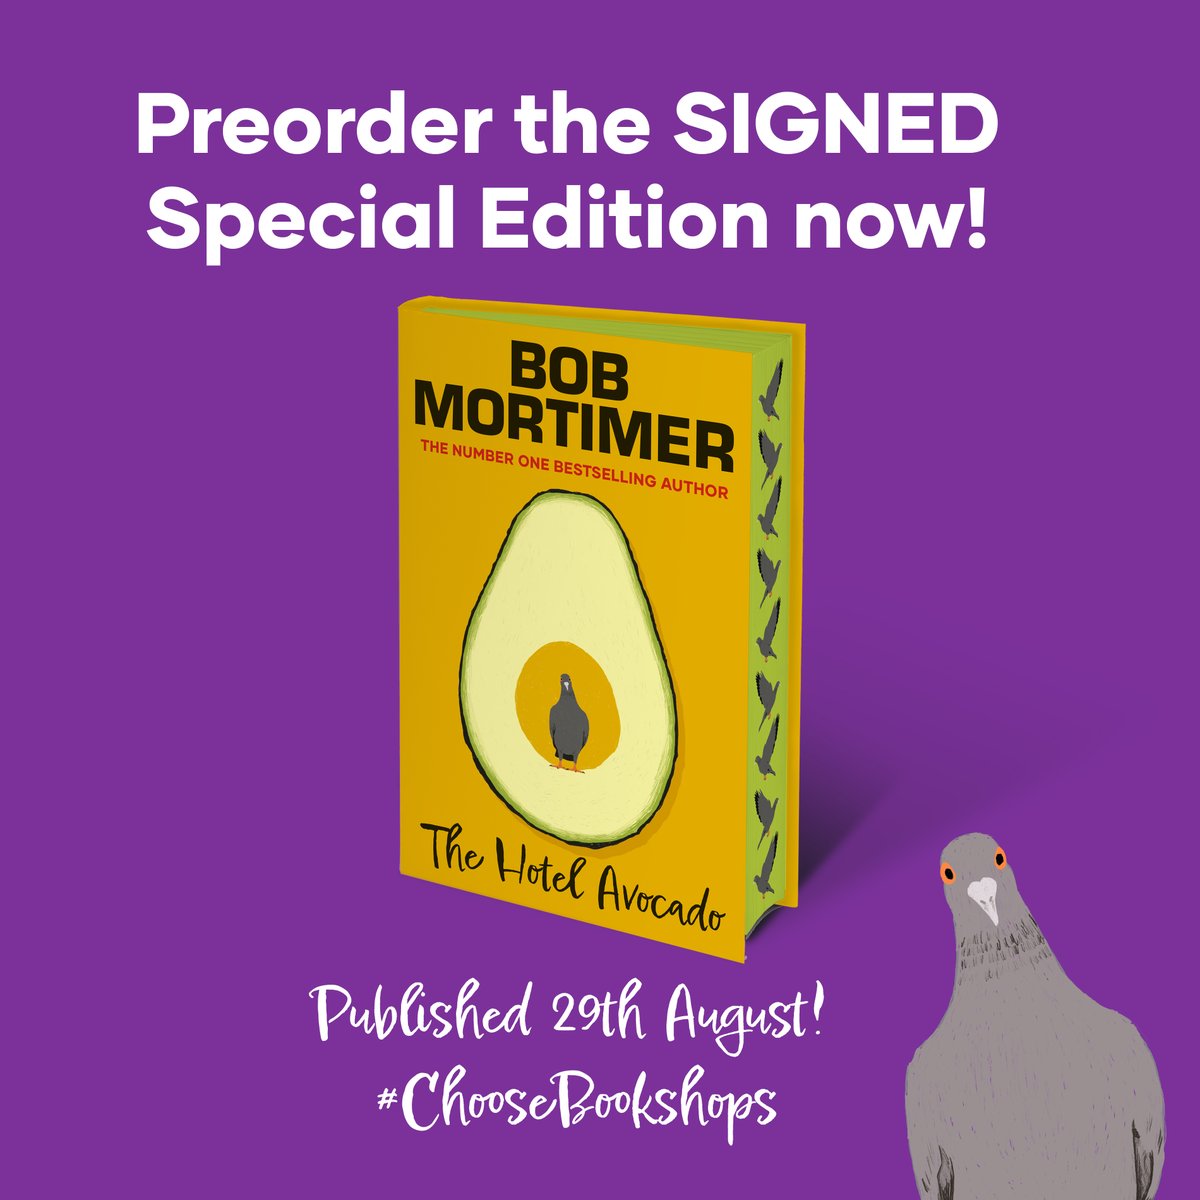 Exciting news this morning! #TheHotelAvocado, the new book from the one and only #BobMortimer, is coming out on the 29th of August! And, just as exciting, you can pre-order it now on our website: maddingcrowdlinlithgow.com/collections/pr… #ChooseBookshops